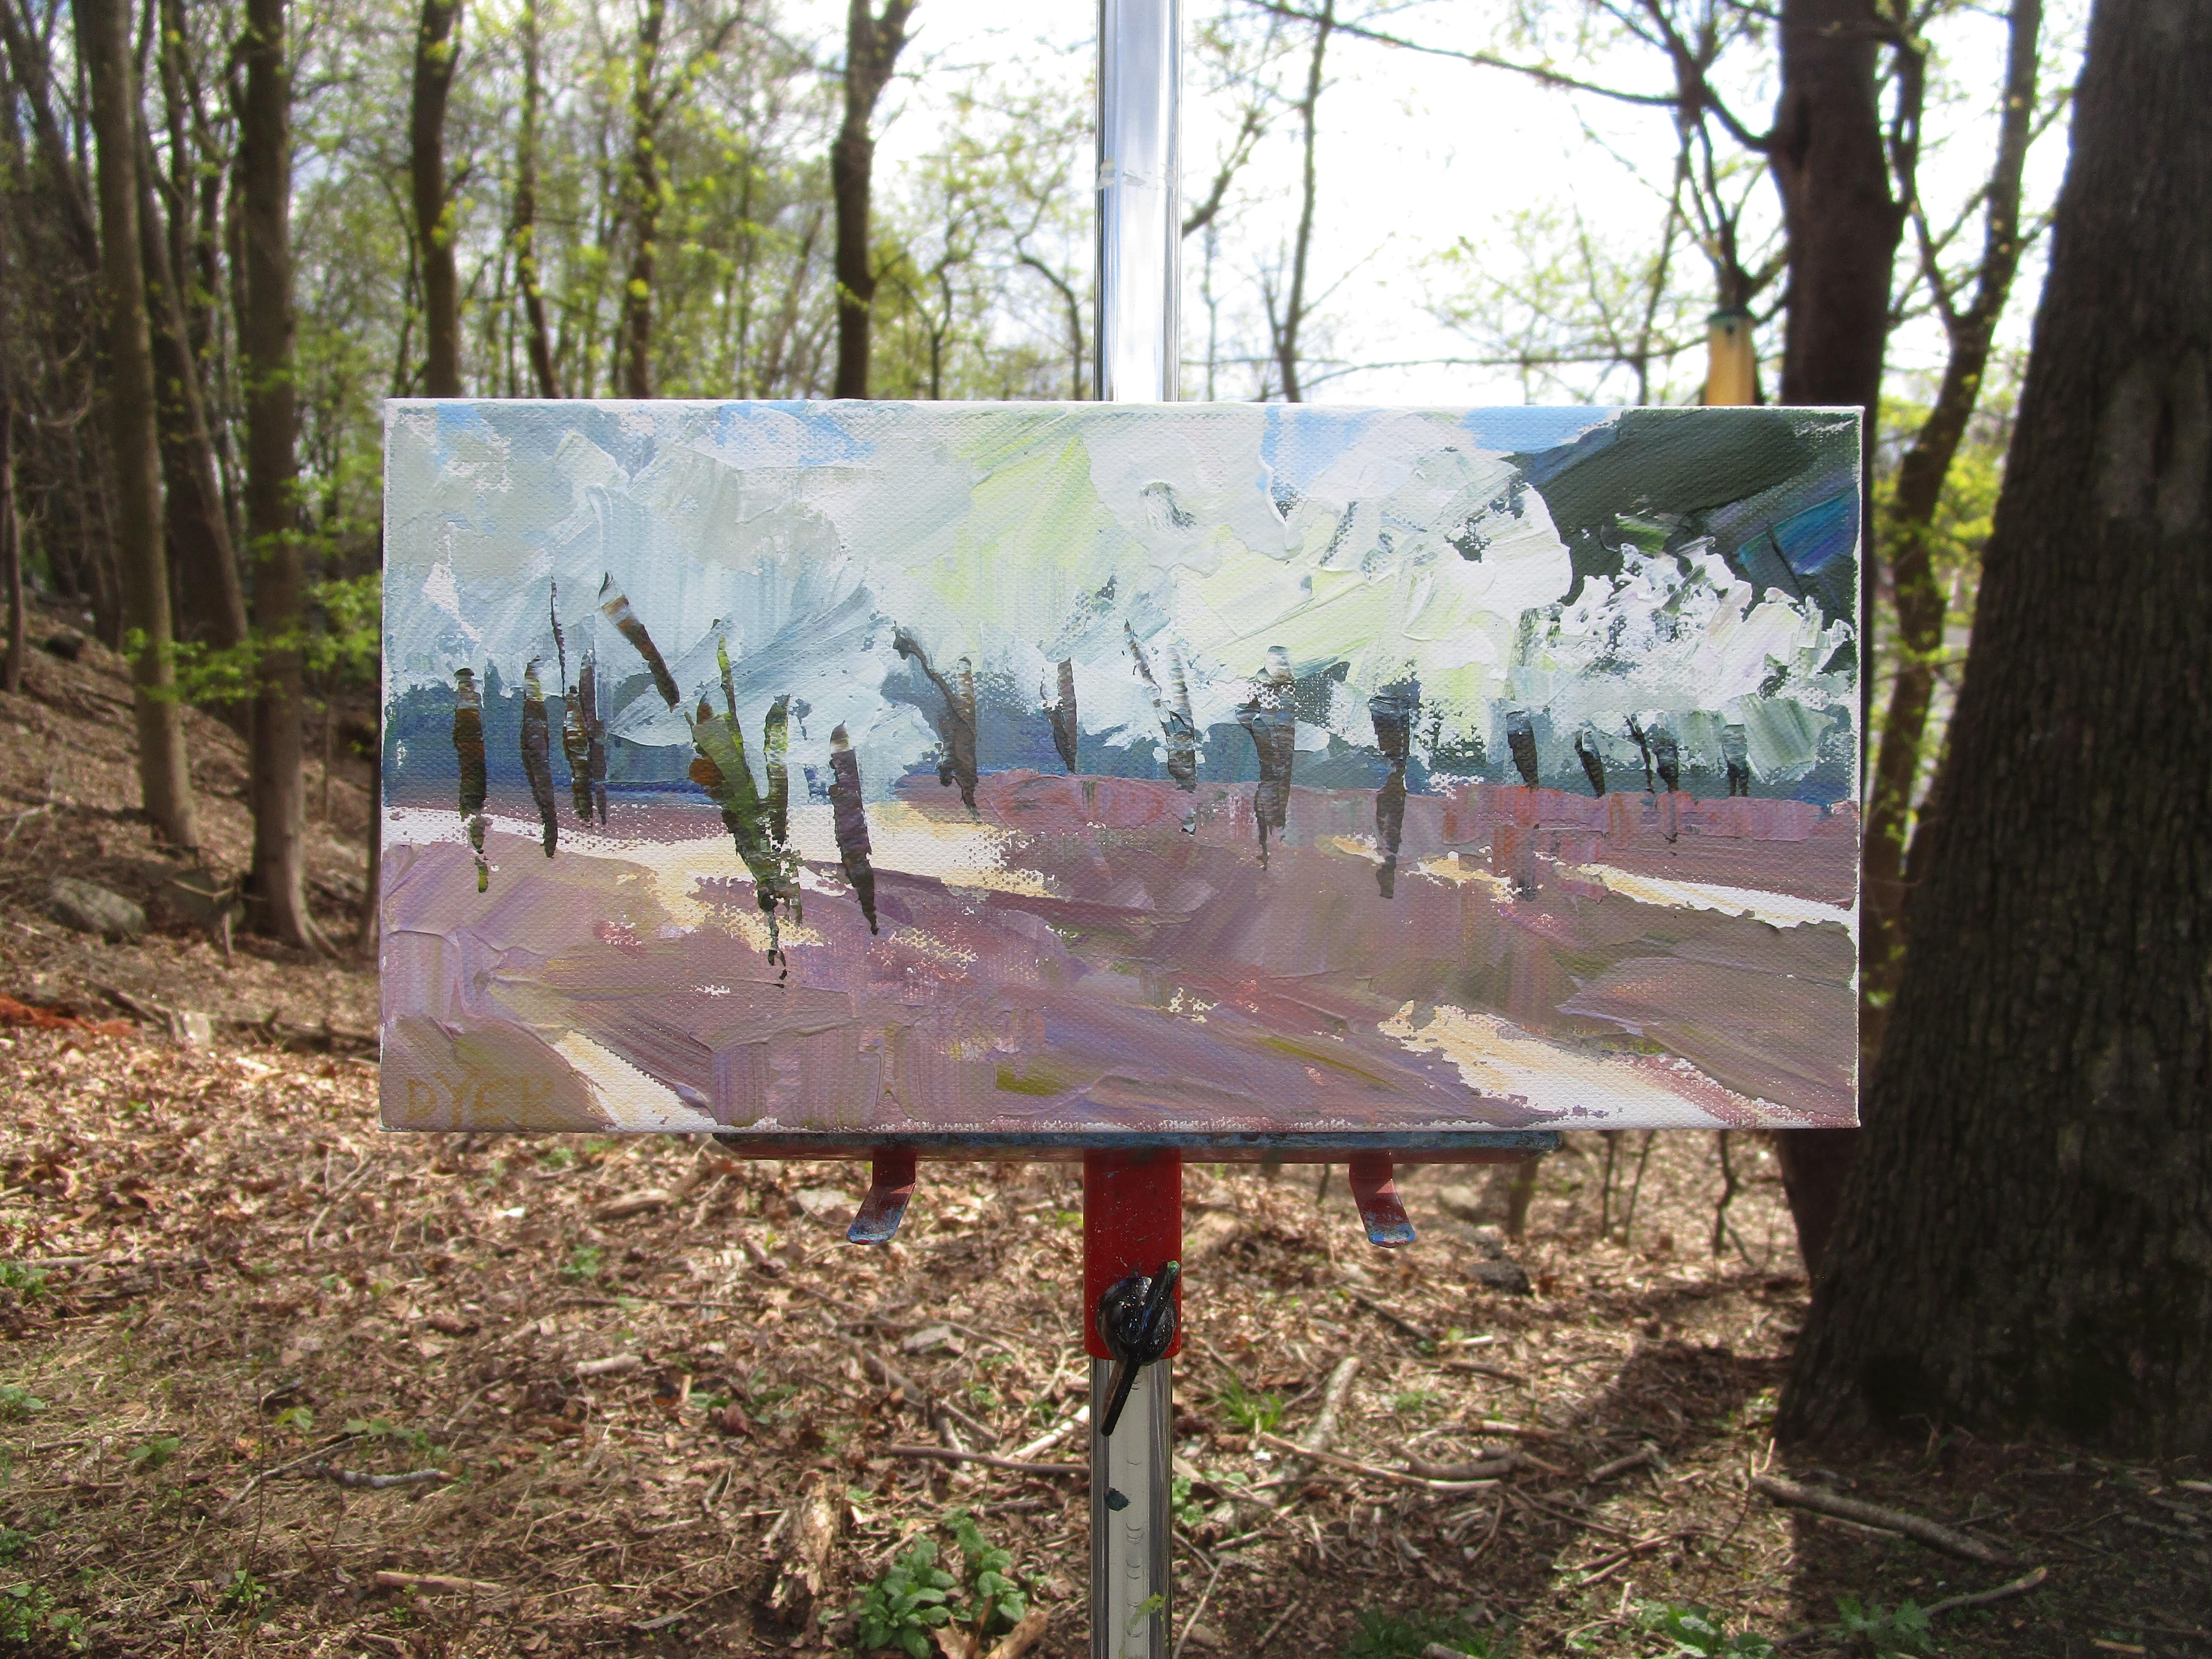 <p>Artist Comments<br>Olive, almond, and cherry trees adorn an orchard in Provence, France. Their white crowns merge, filtering the sunlight and casting dappled shade below. Artist Janet Dyer uses a palette knife in creating this spring